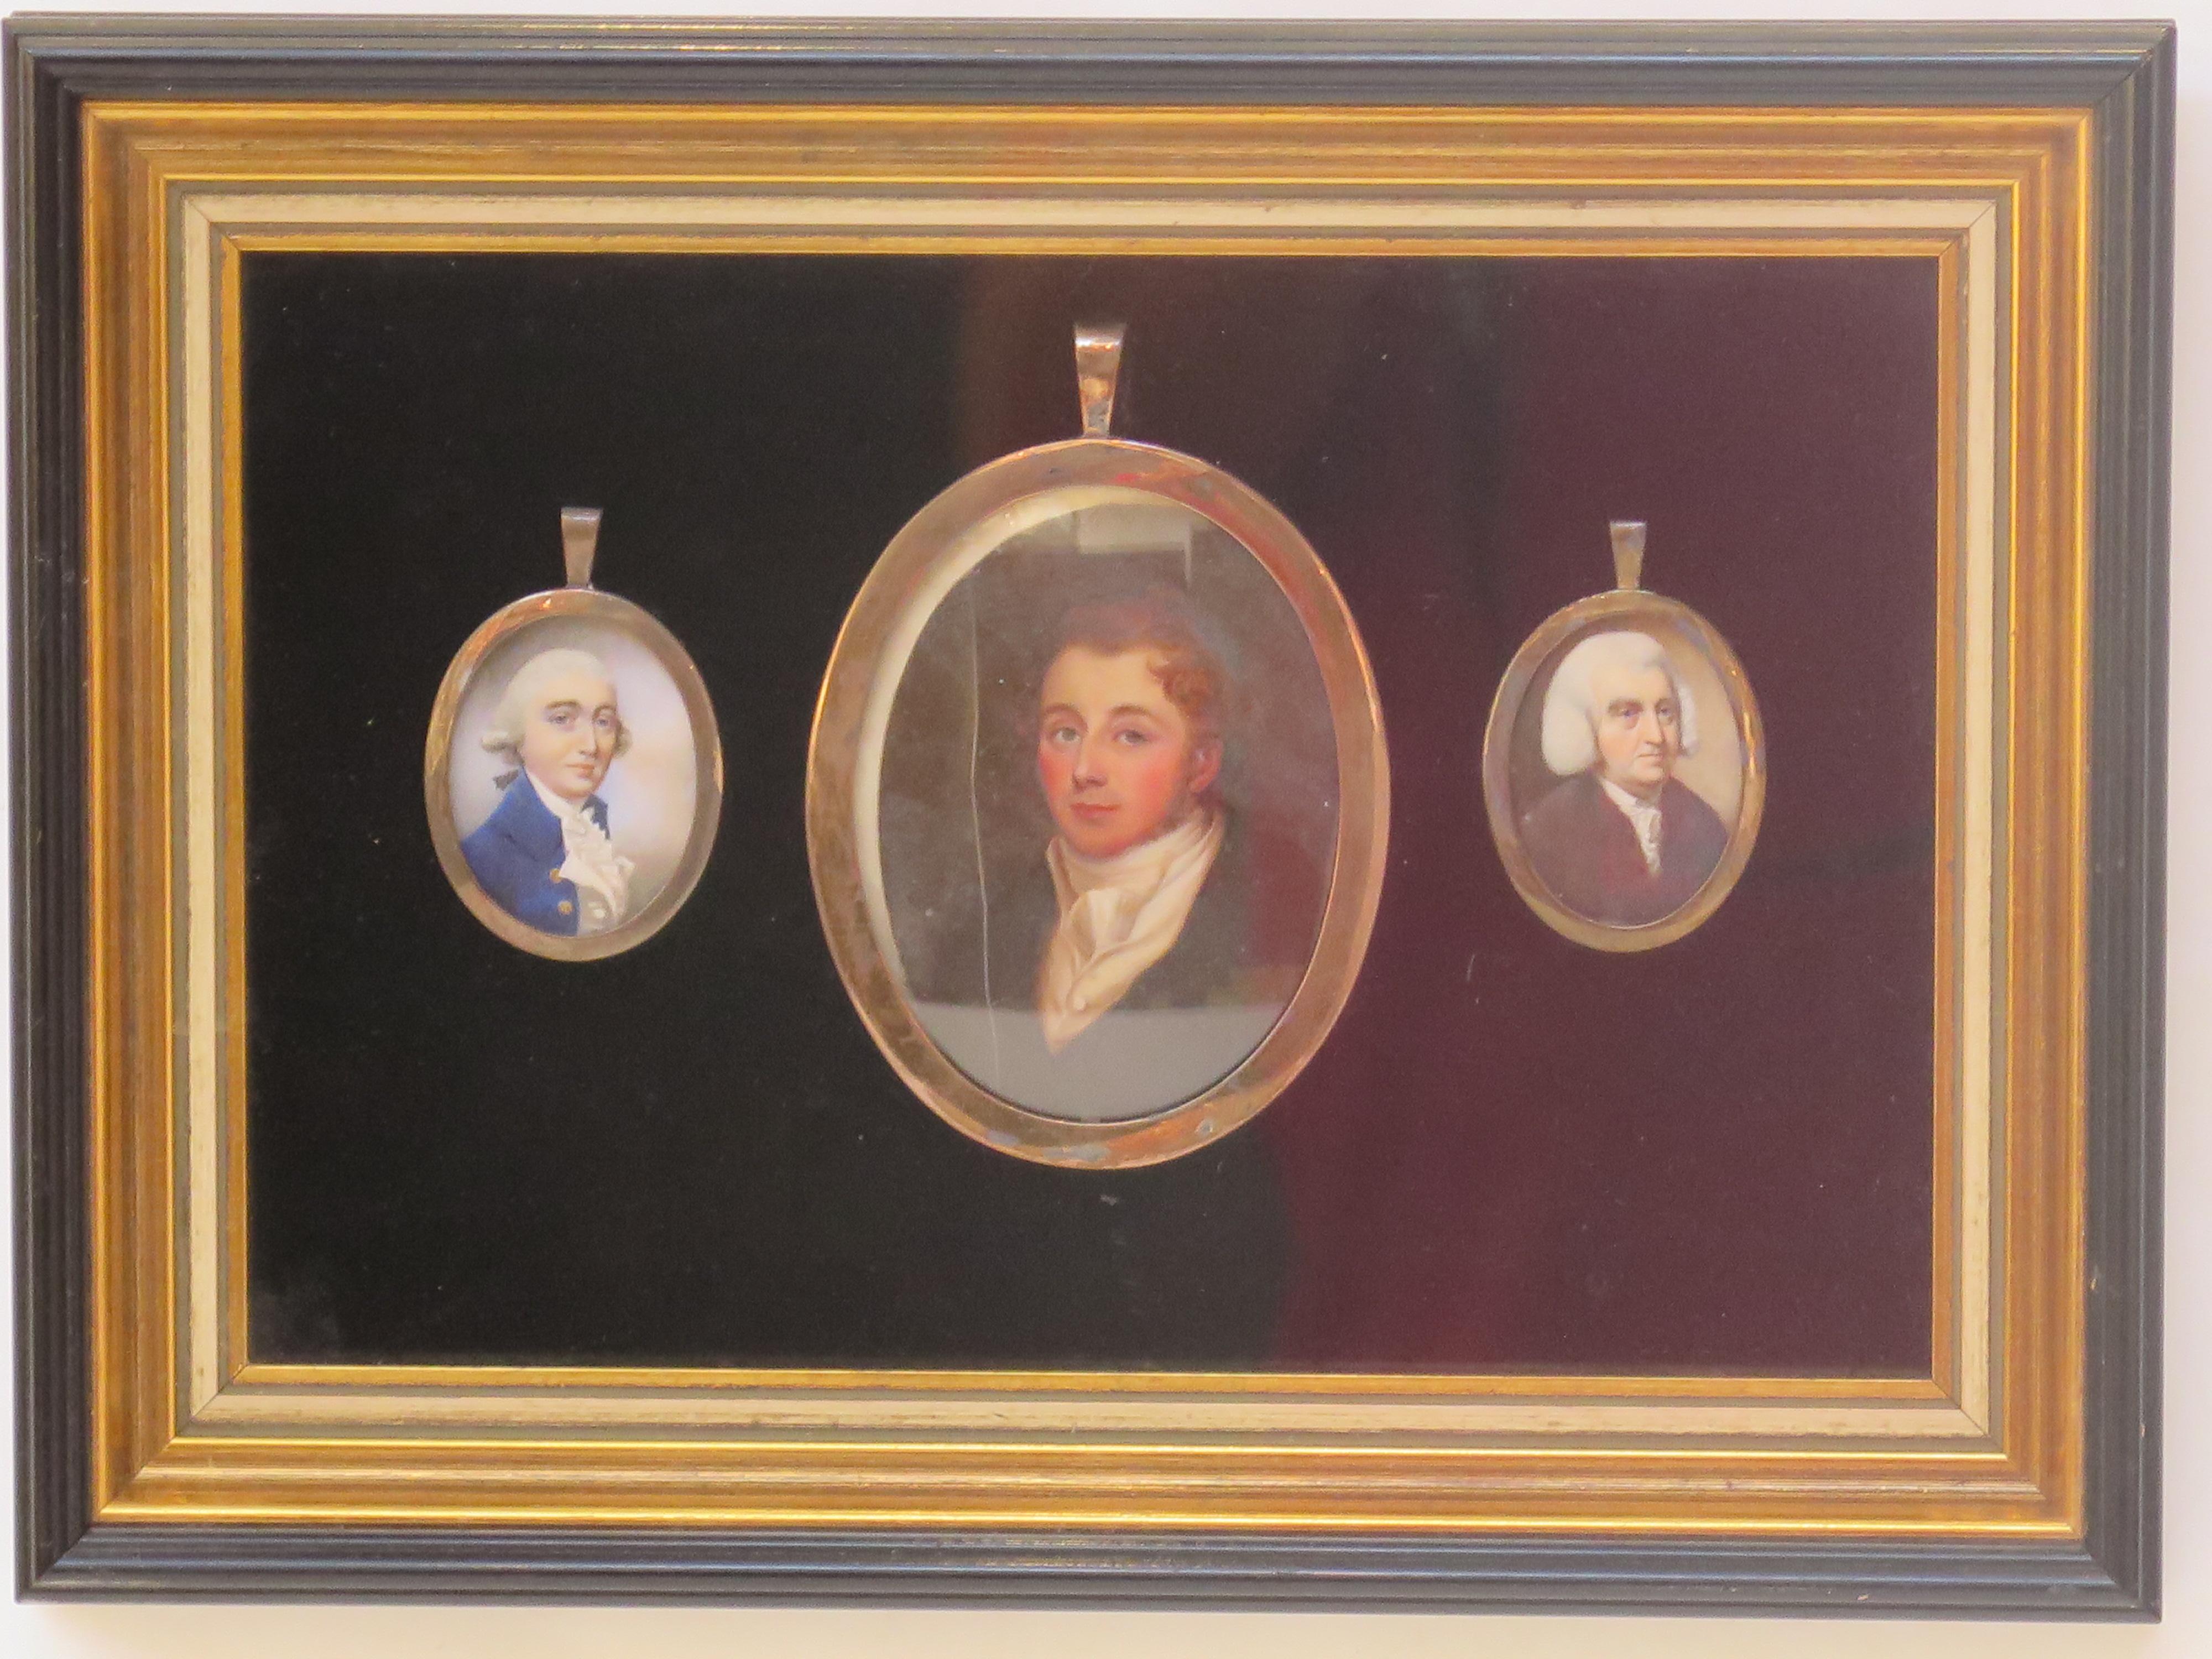 a group or collection of three miniature portrait paintings of gentlemen, framed together, the central larger picture, English Regency, shows a younger man with brown hair dressed in a style popular at that time, the other small ovals depict white